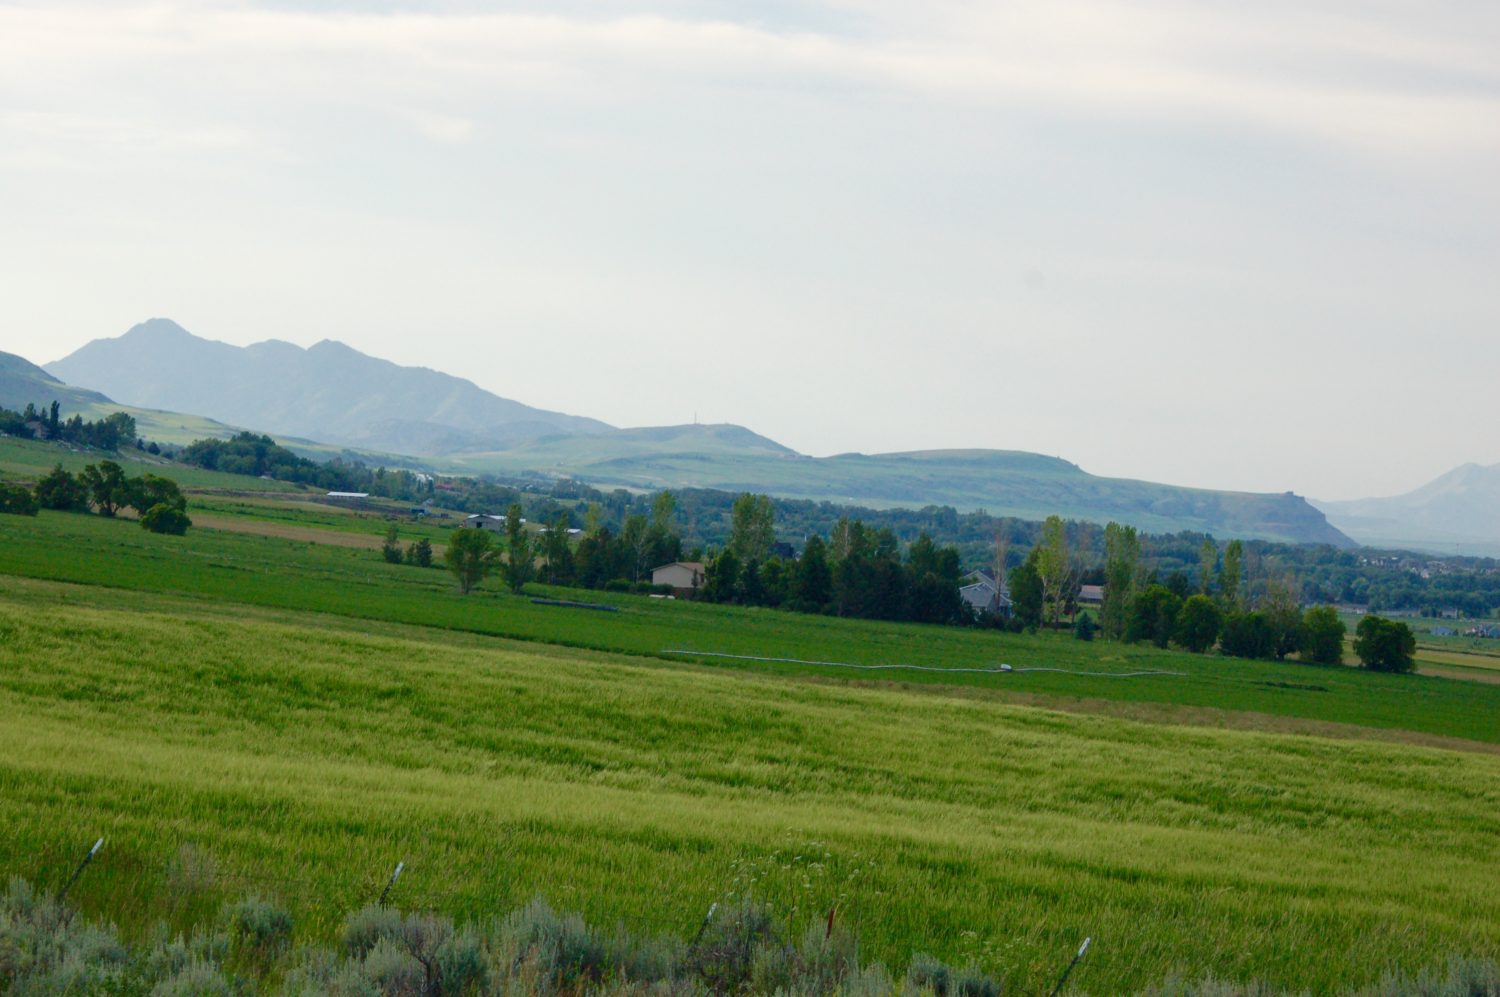 View across a field with the view of mountains in the background.